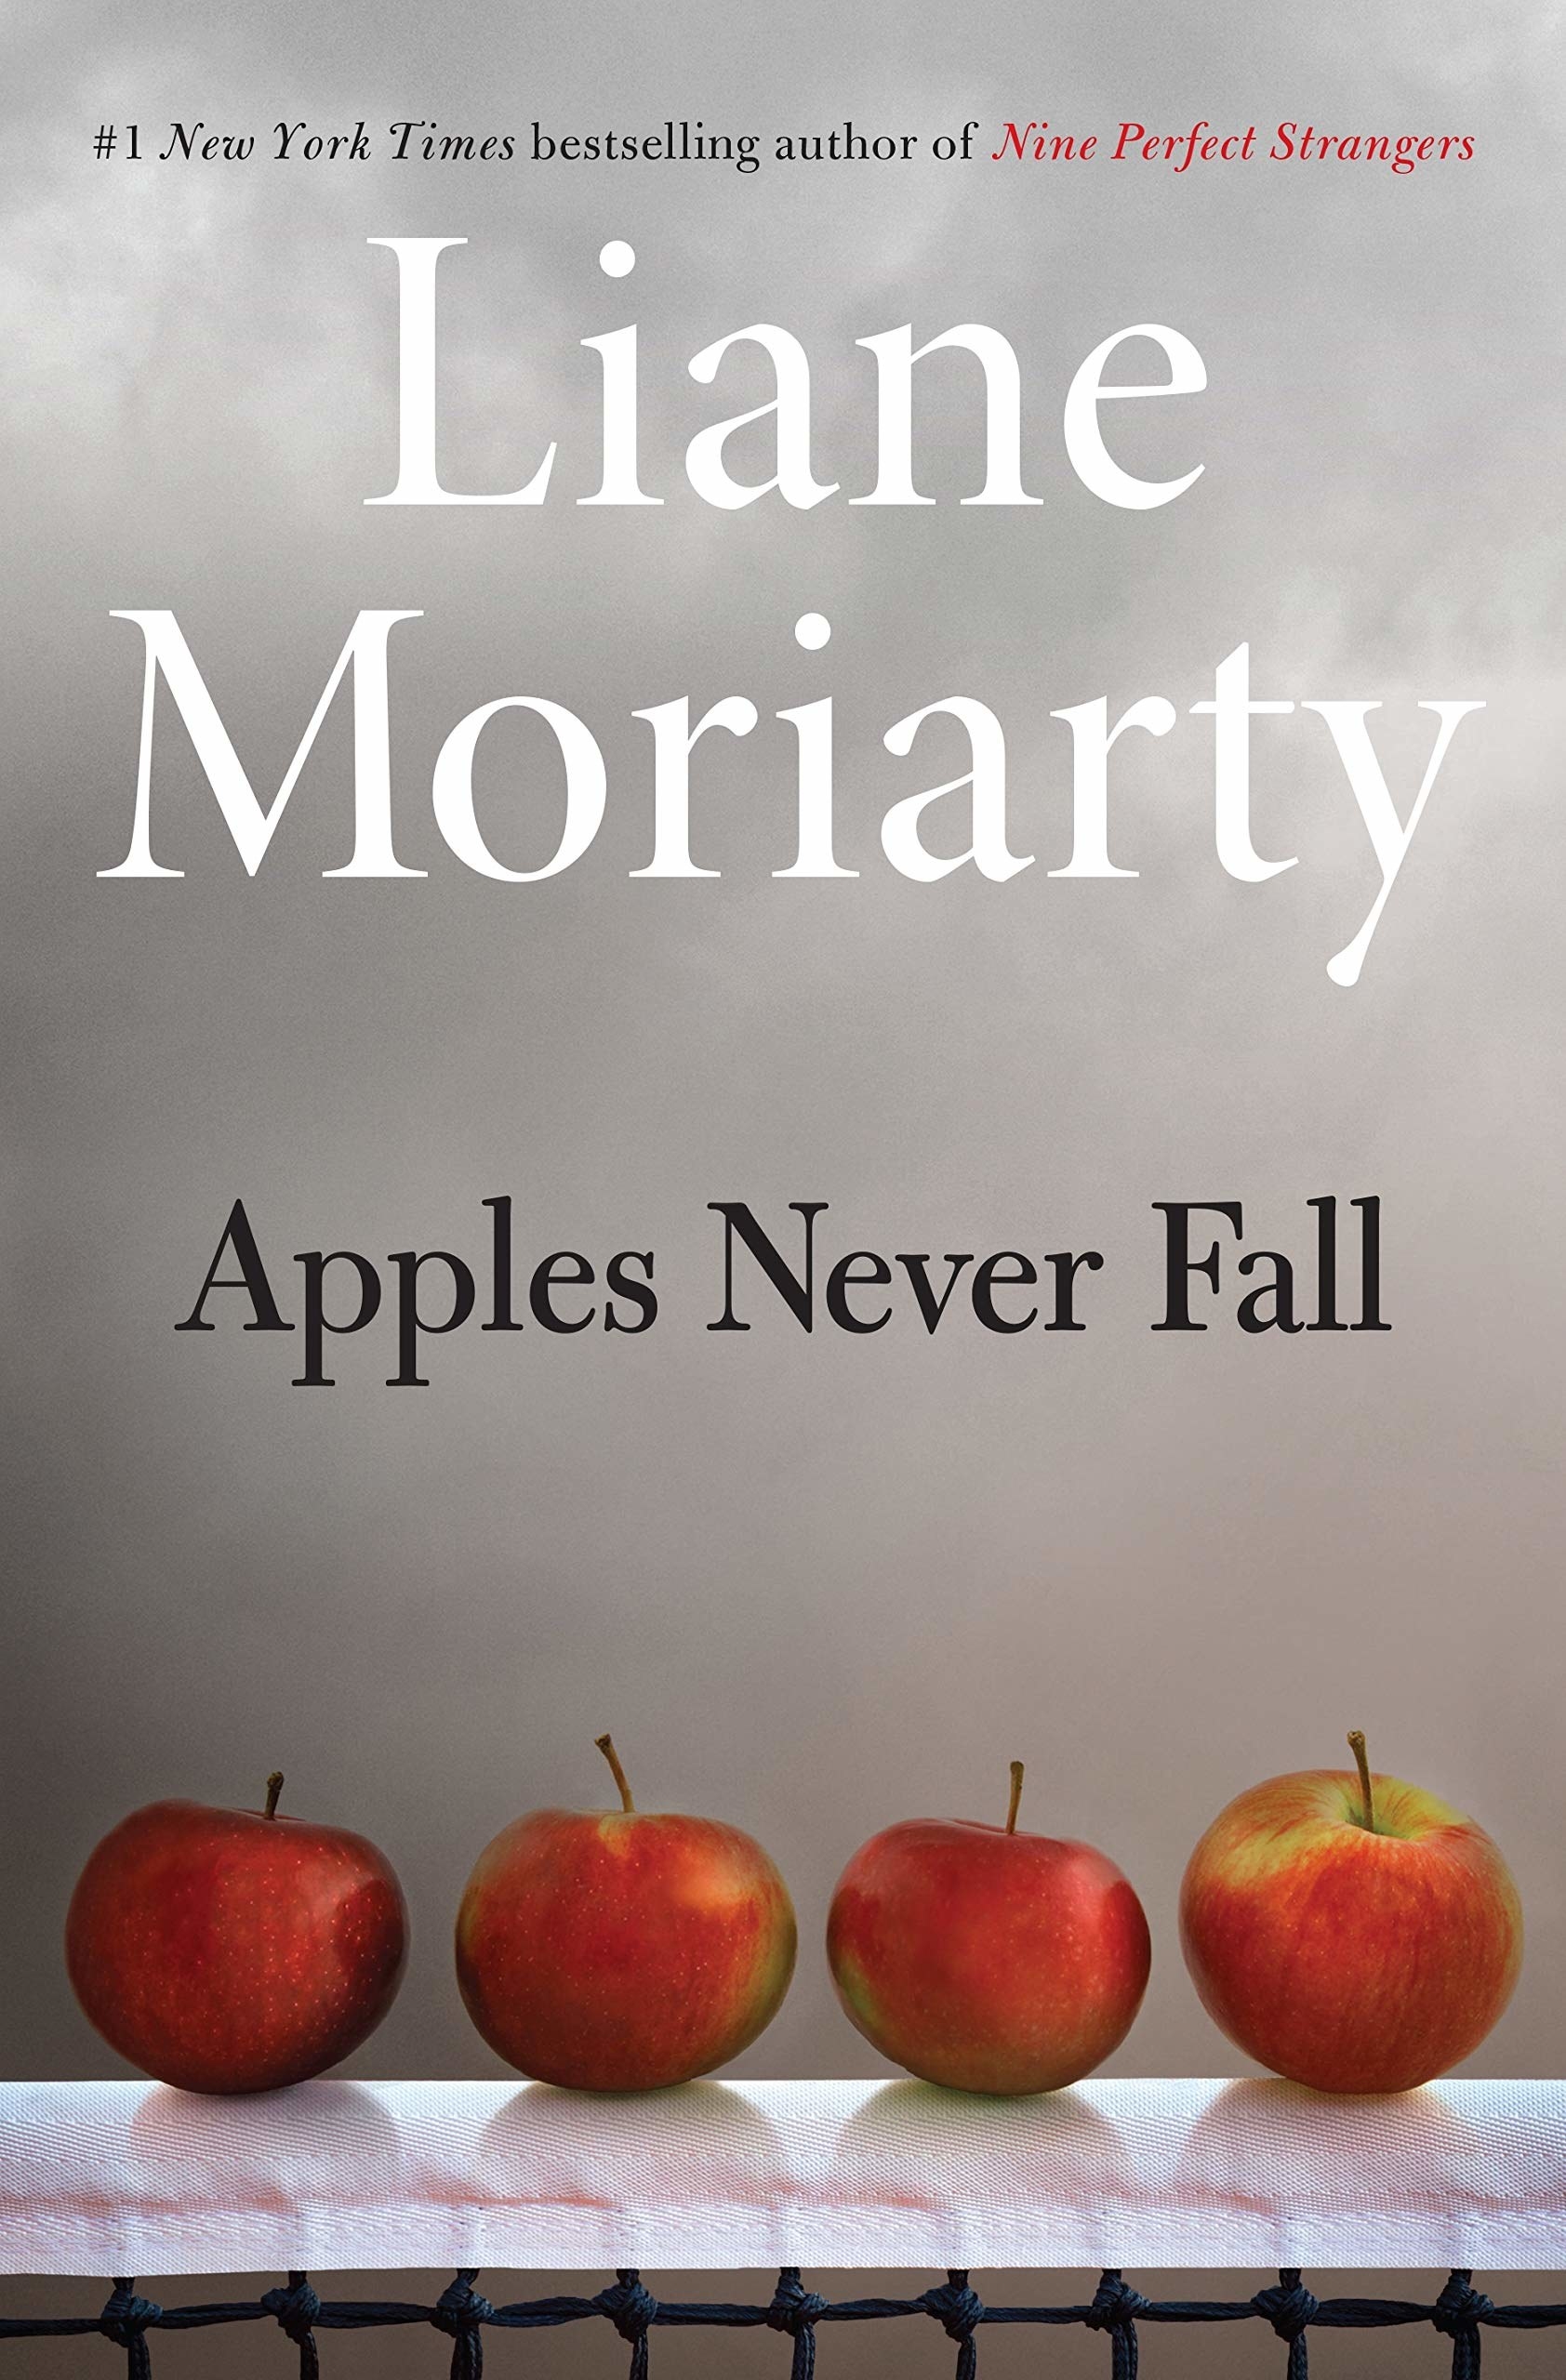 Book cover for &quot;Apples Never Fall&quot; by Liane Moriarty, featuring four apples on top of paper towel-covered barbed wire